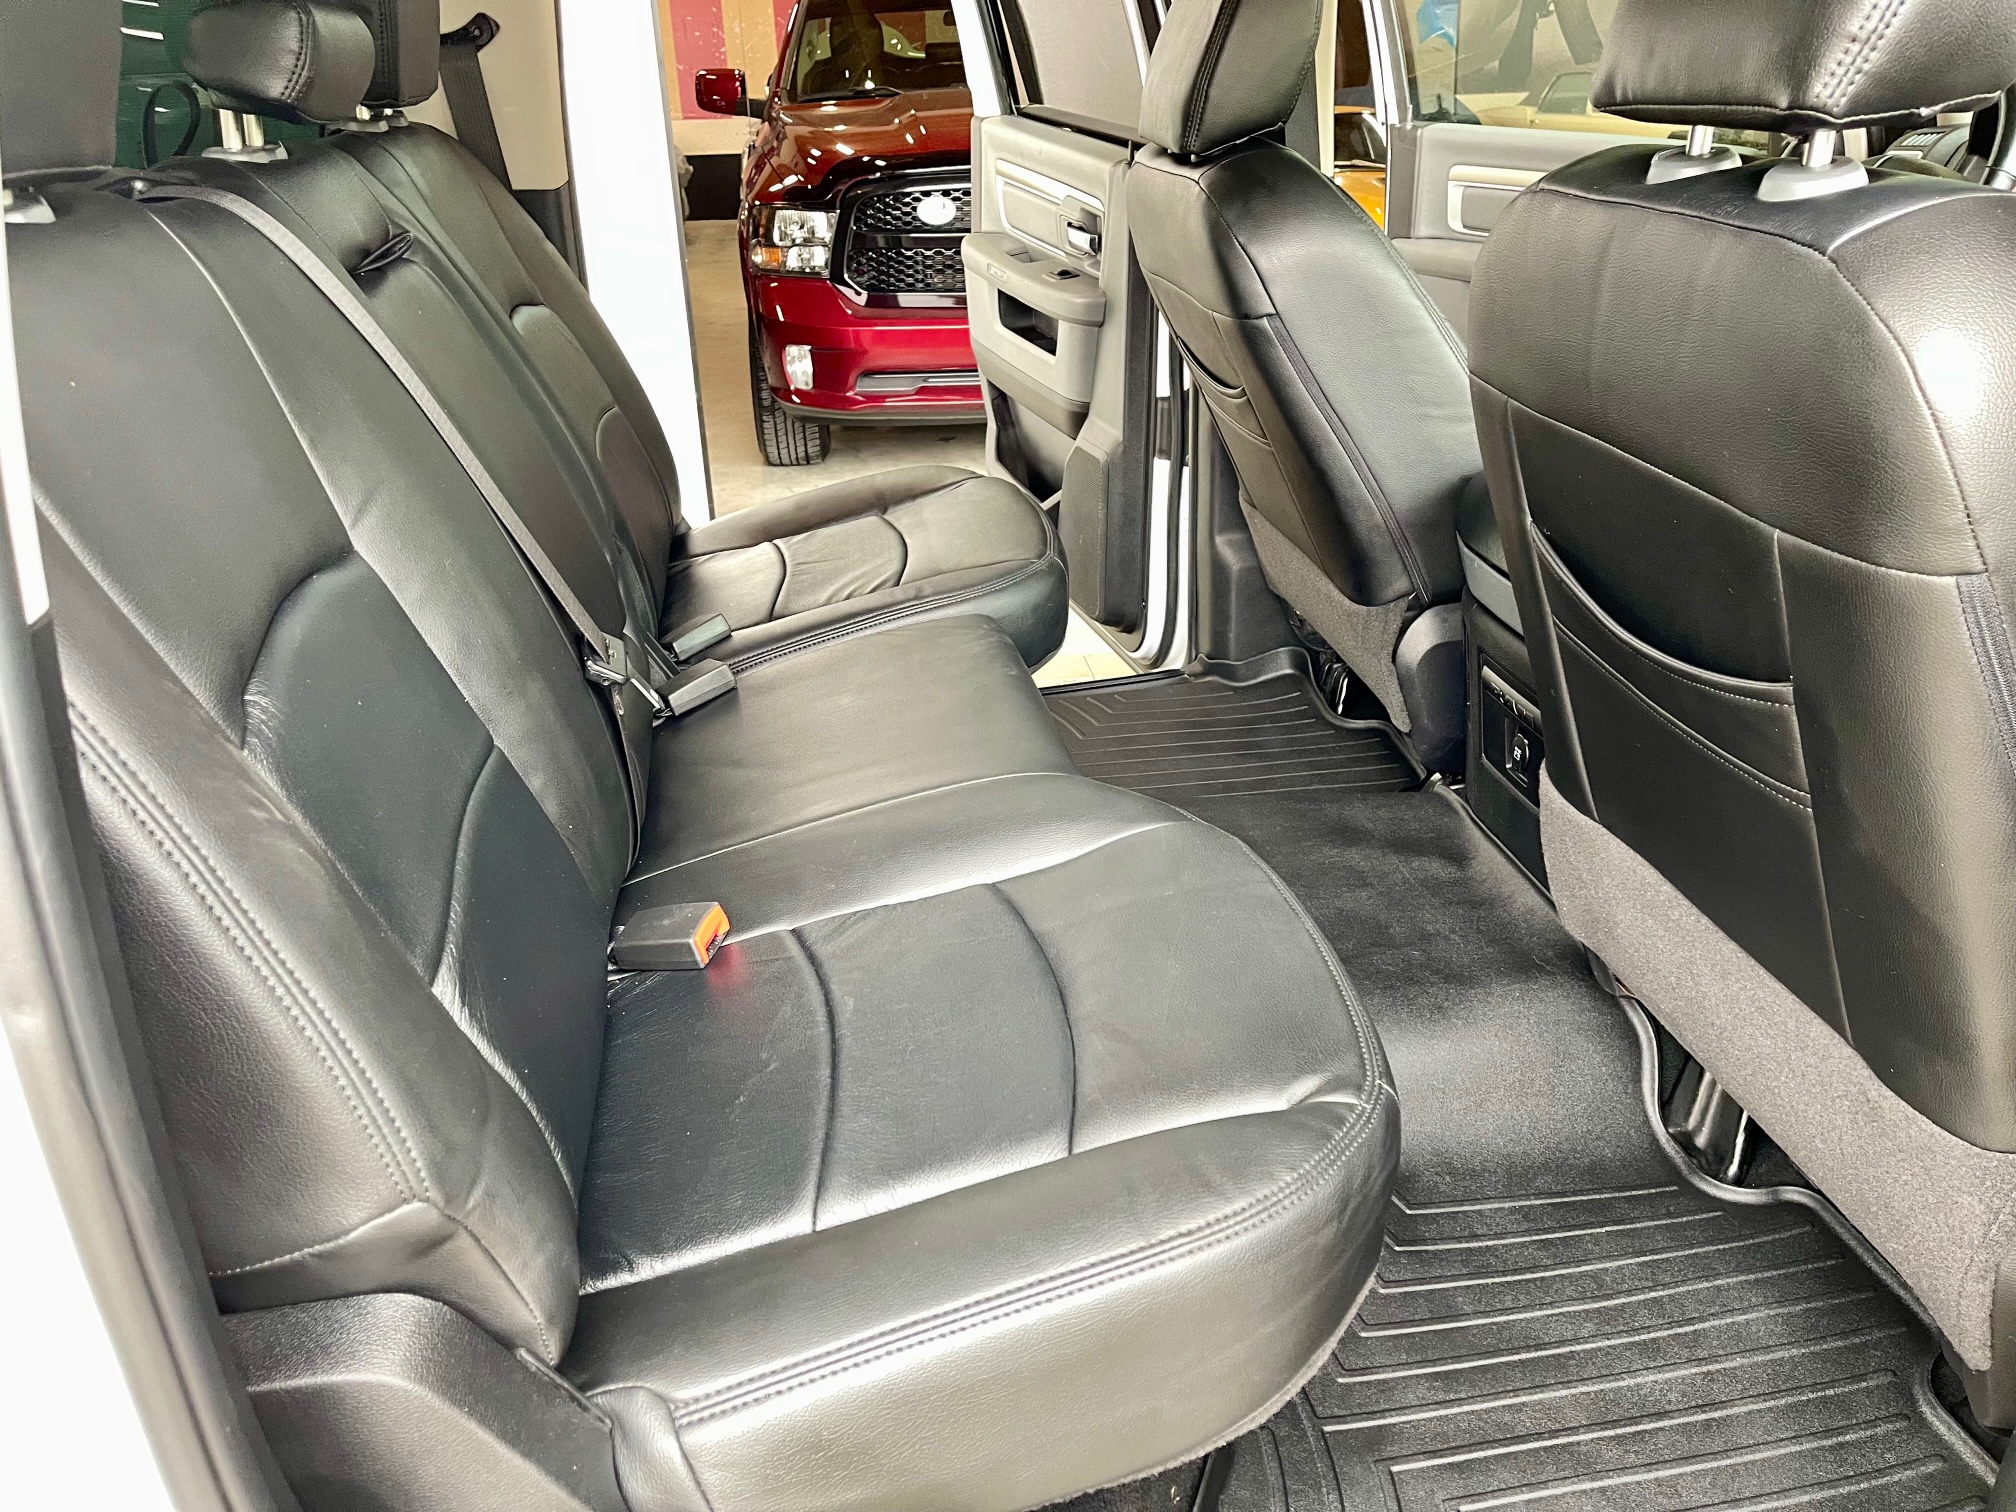 2017 dodge ram pick up for sale leather interior